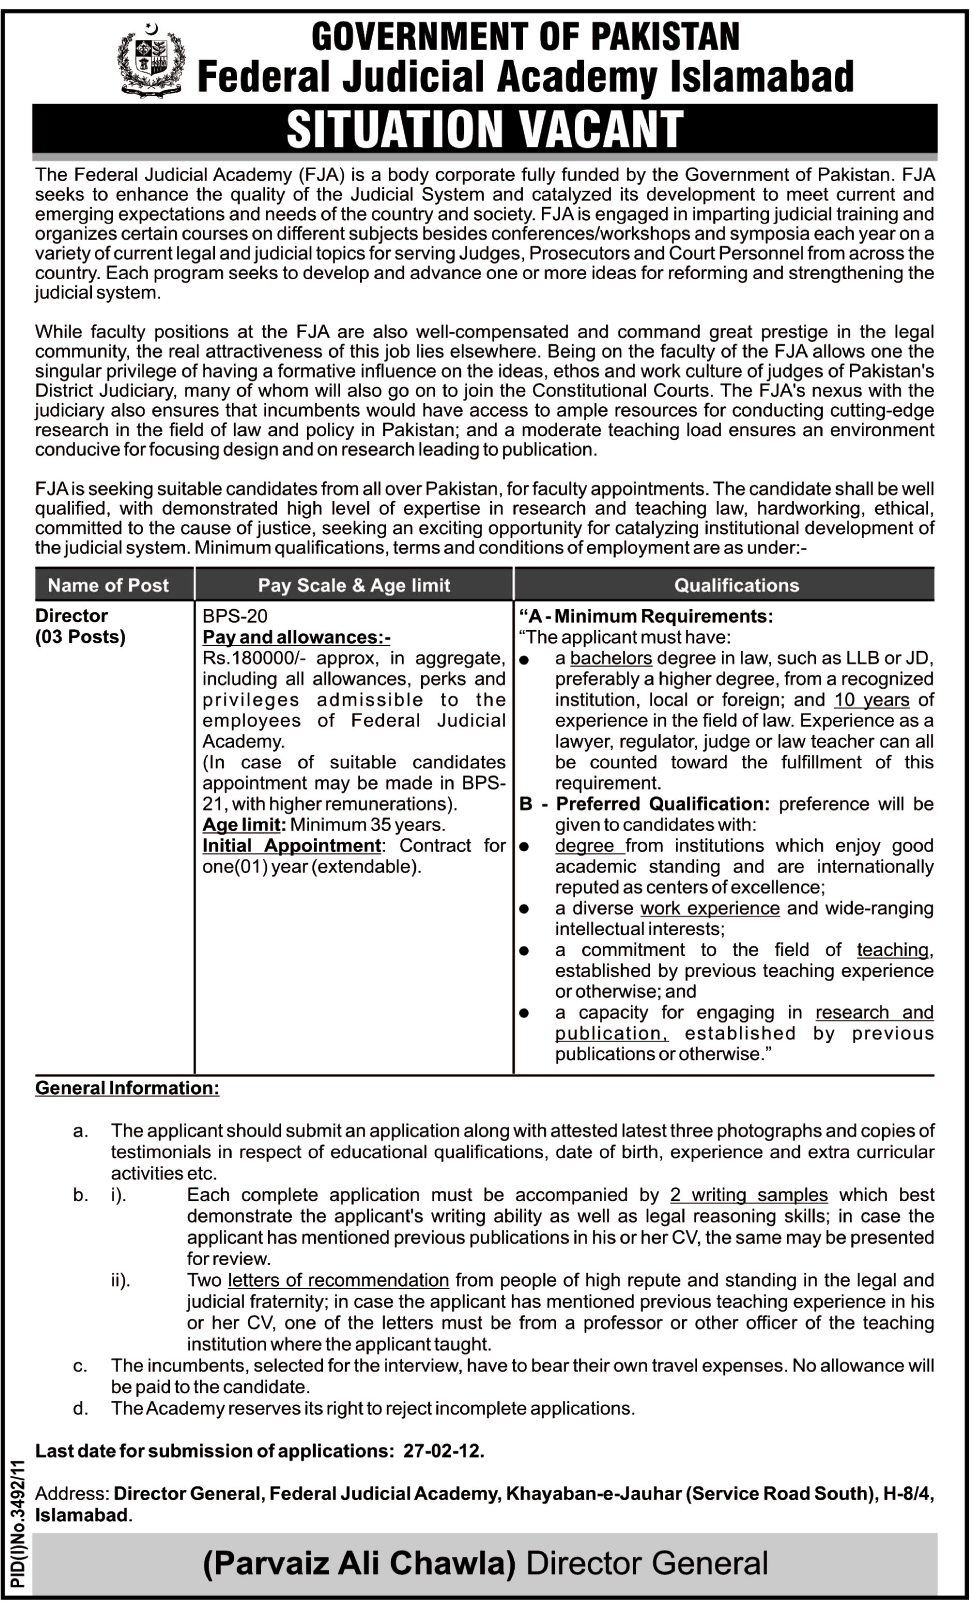 Federal Judicial Academy Islamabad, Government of Pakistan Jobs Opportunity